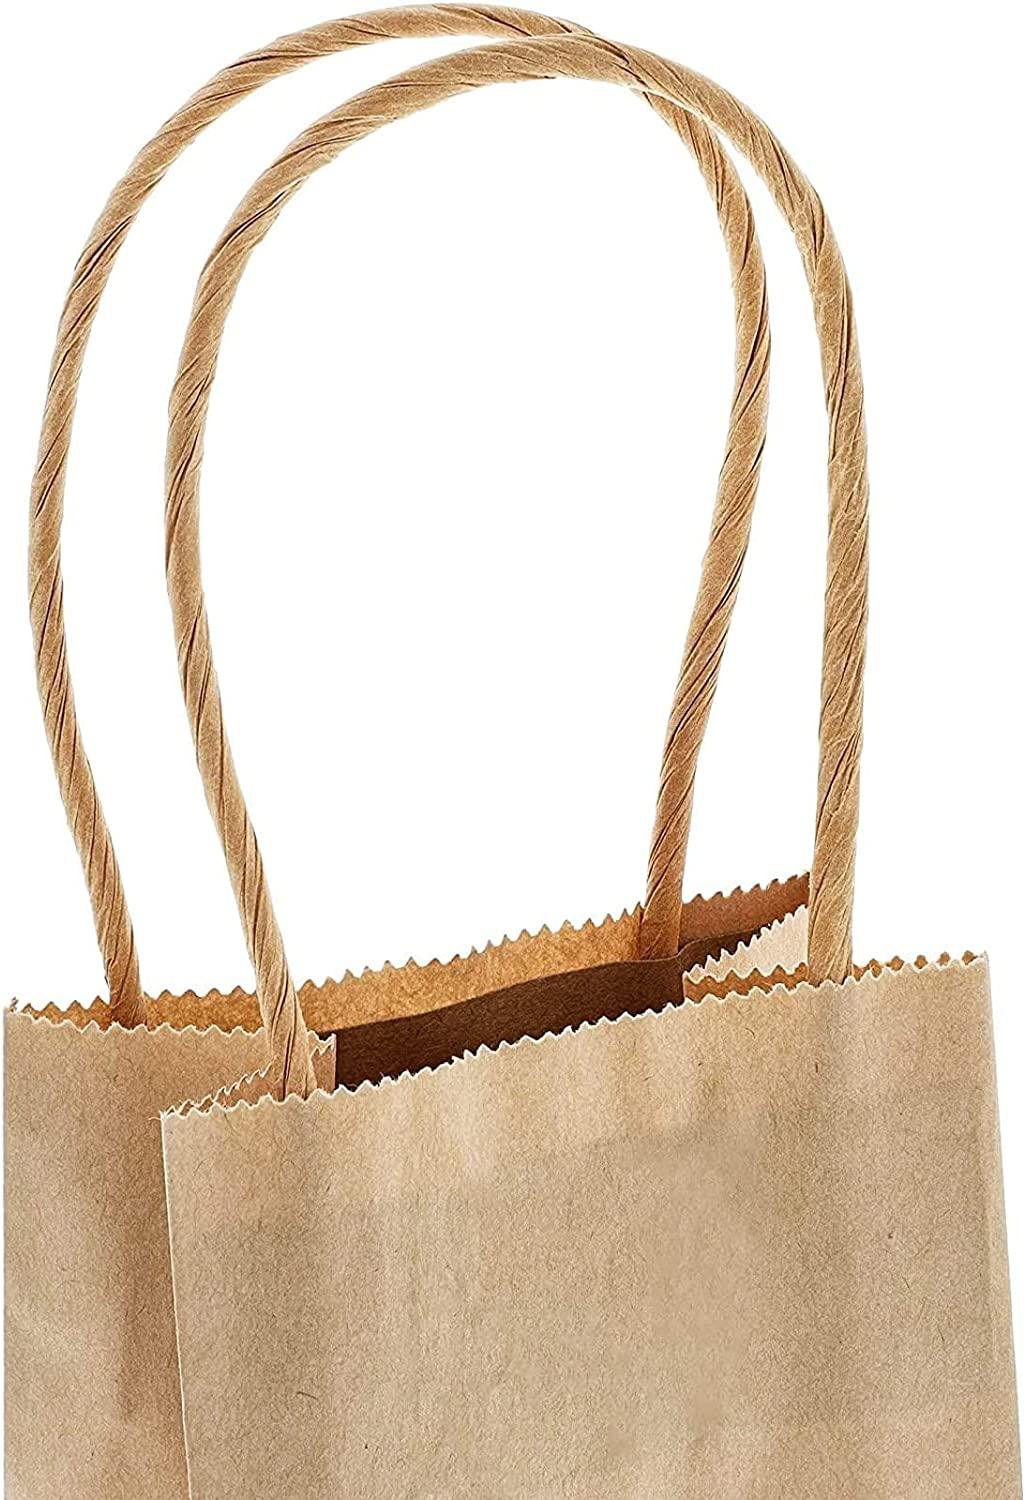 50 Pack Small Brown Kraft Paper Gift Bags with Handles (6.25x3.5x2.4) - Lasercutwraps Shop